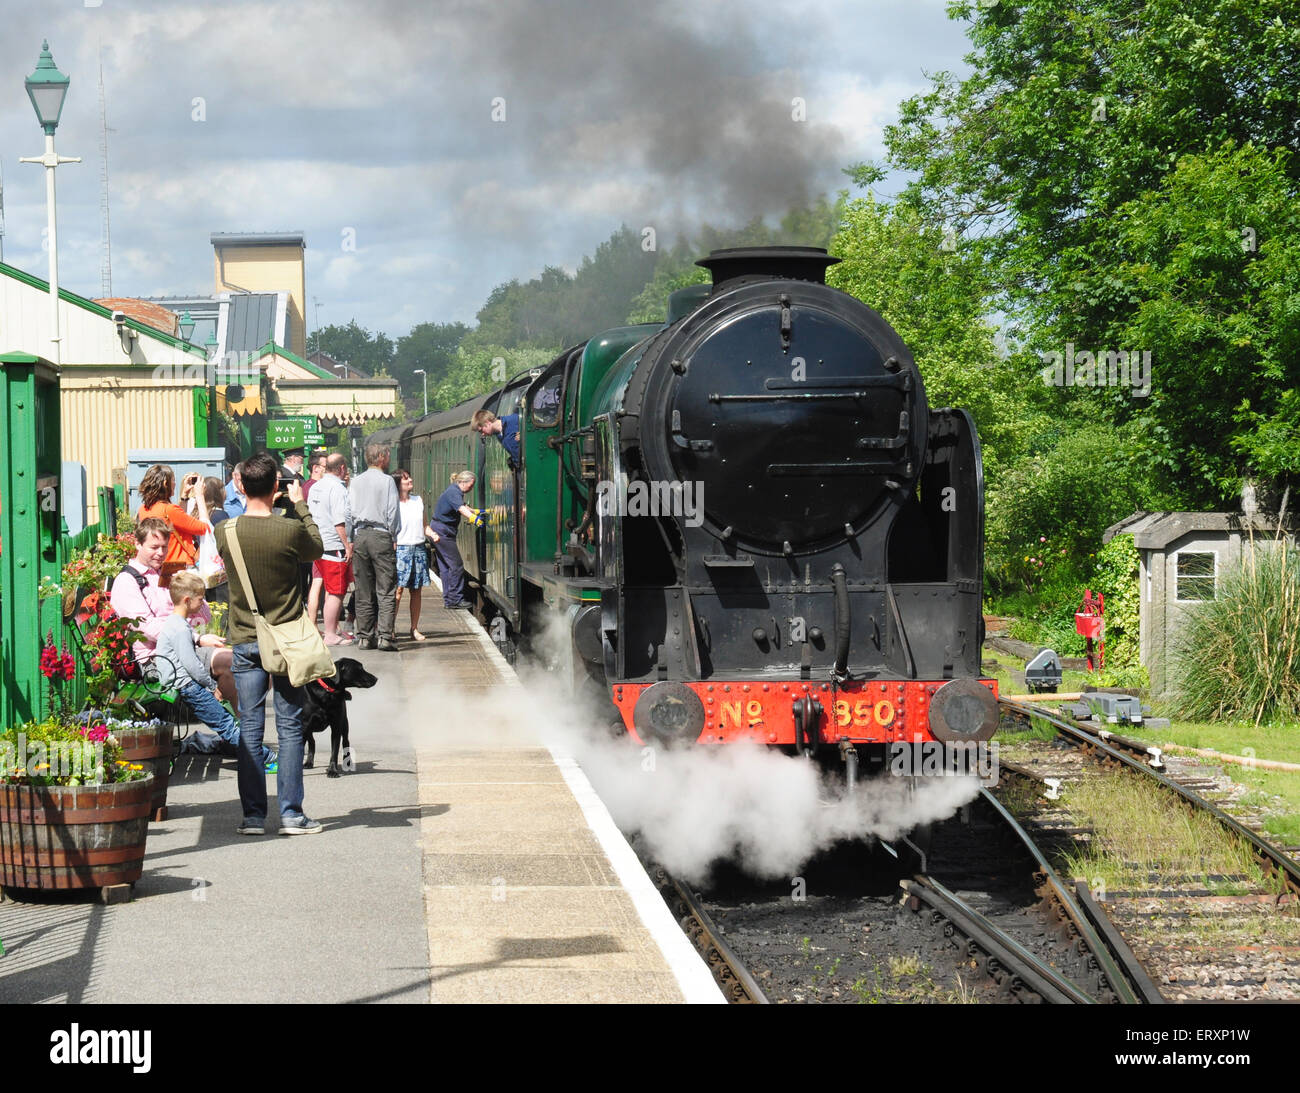 Preserved steam locomotive No 850, Lord Nelson at Alton on the Mid Hants Railway, Hampshire, England Stock Photo